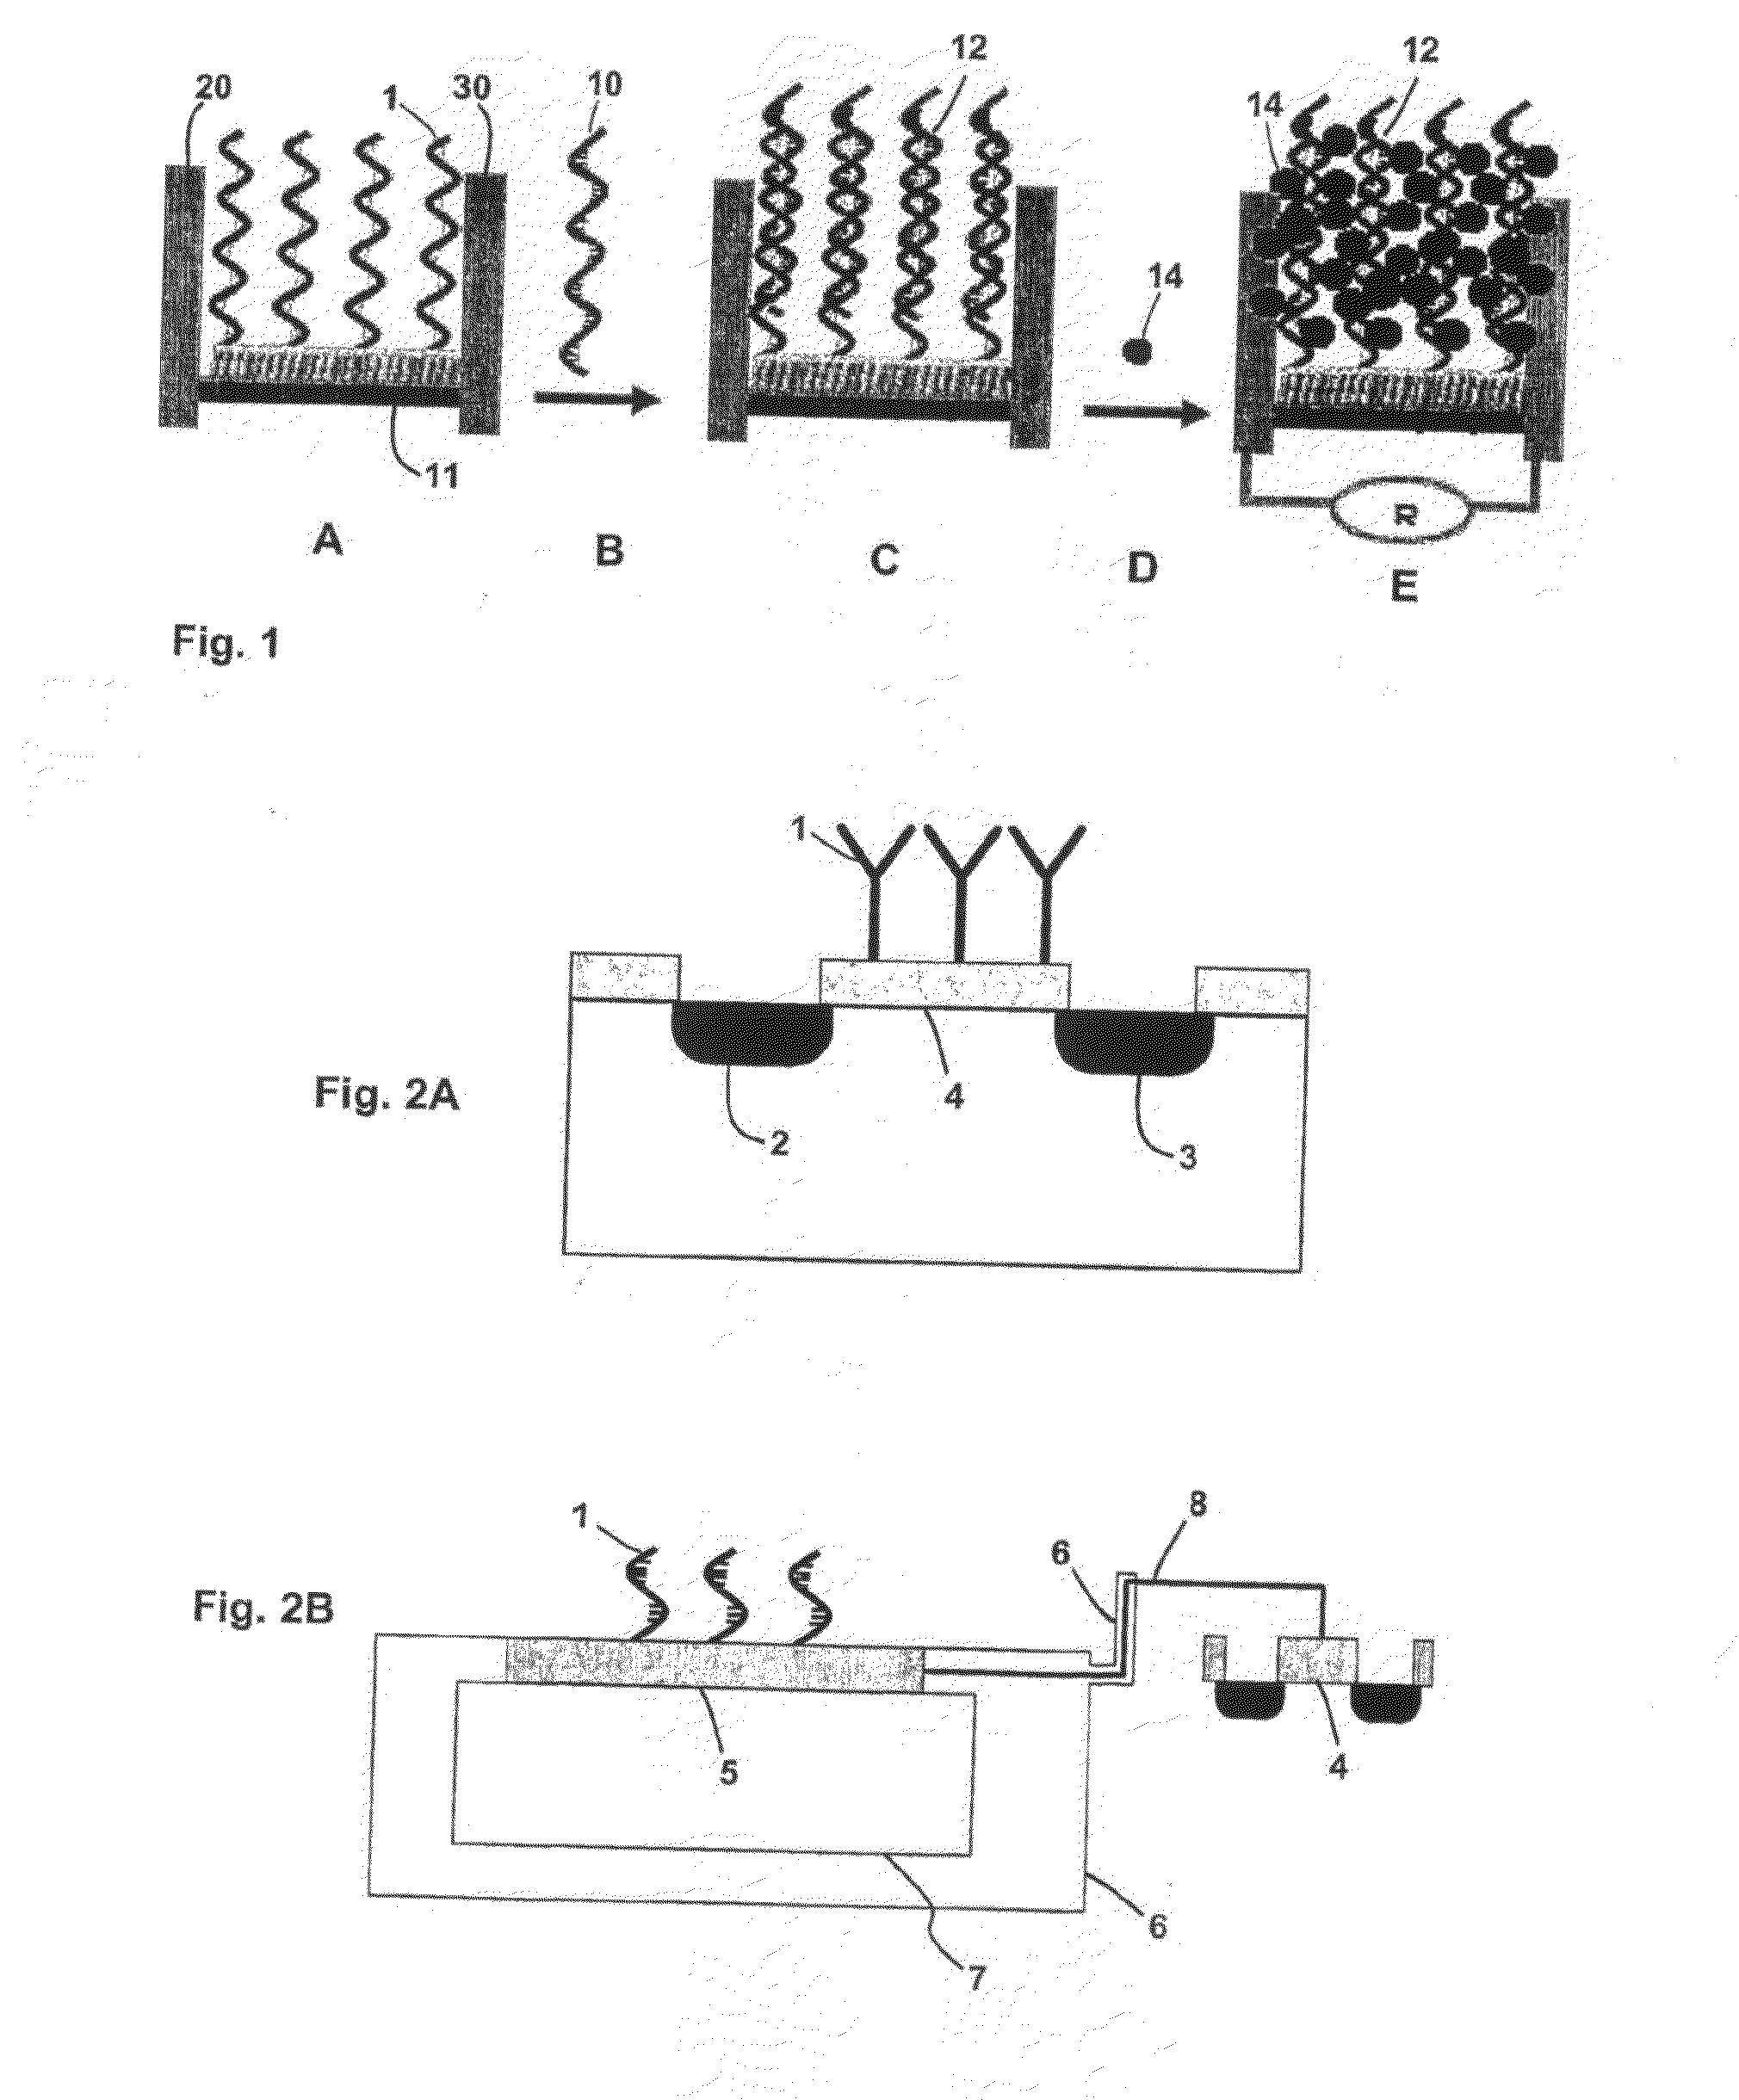 Method of electrically detecting a biological analyte molecule